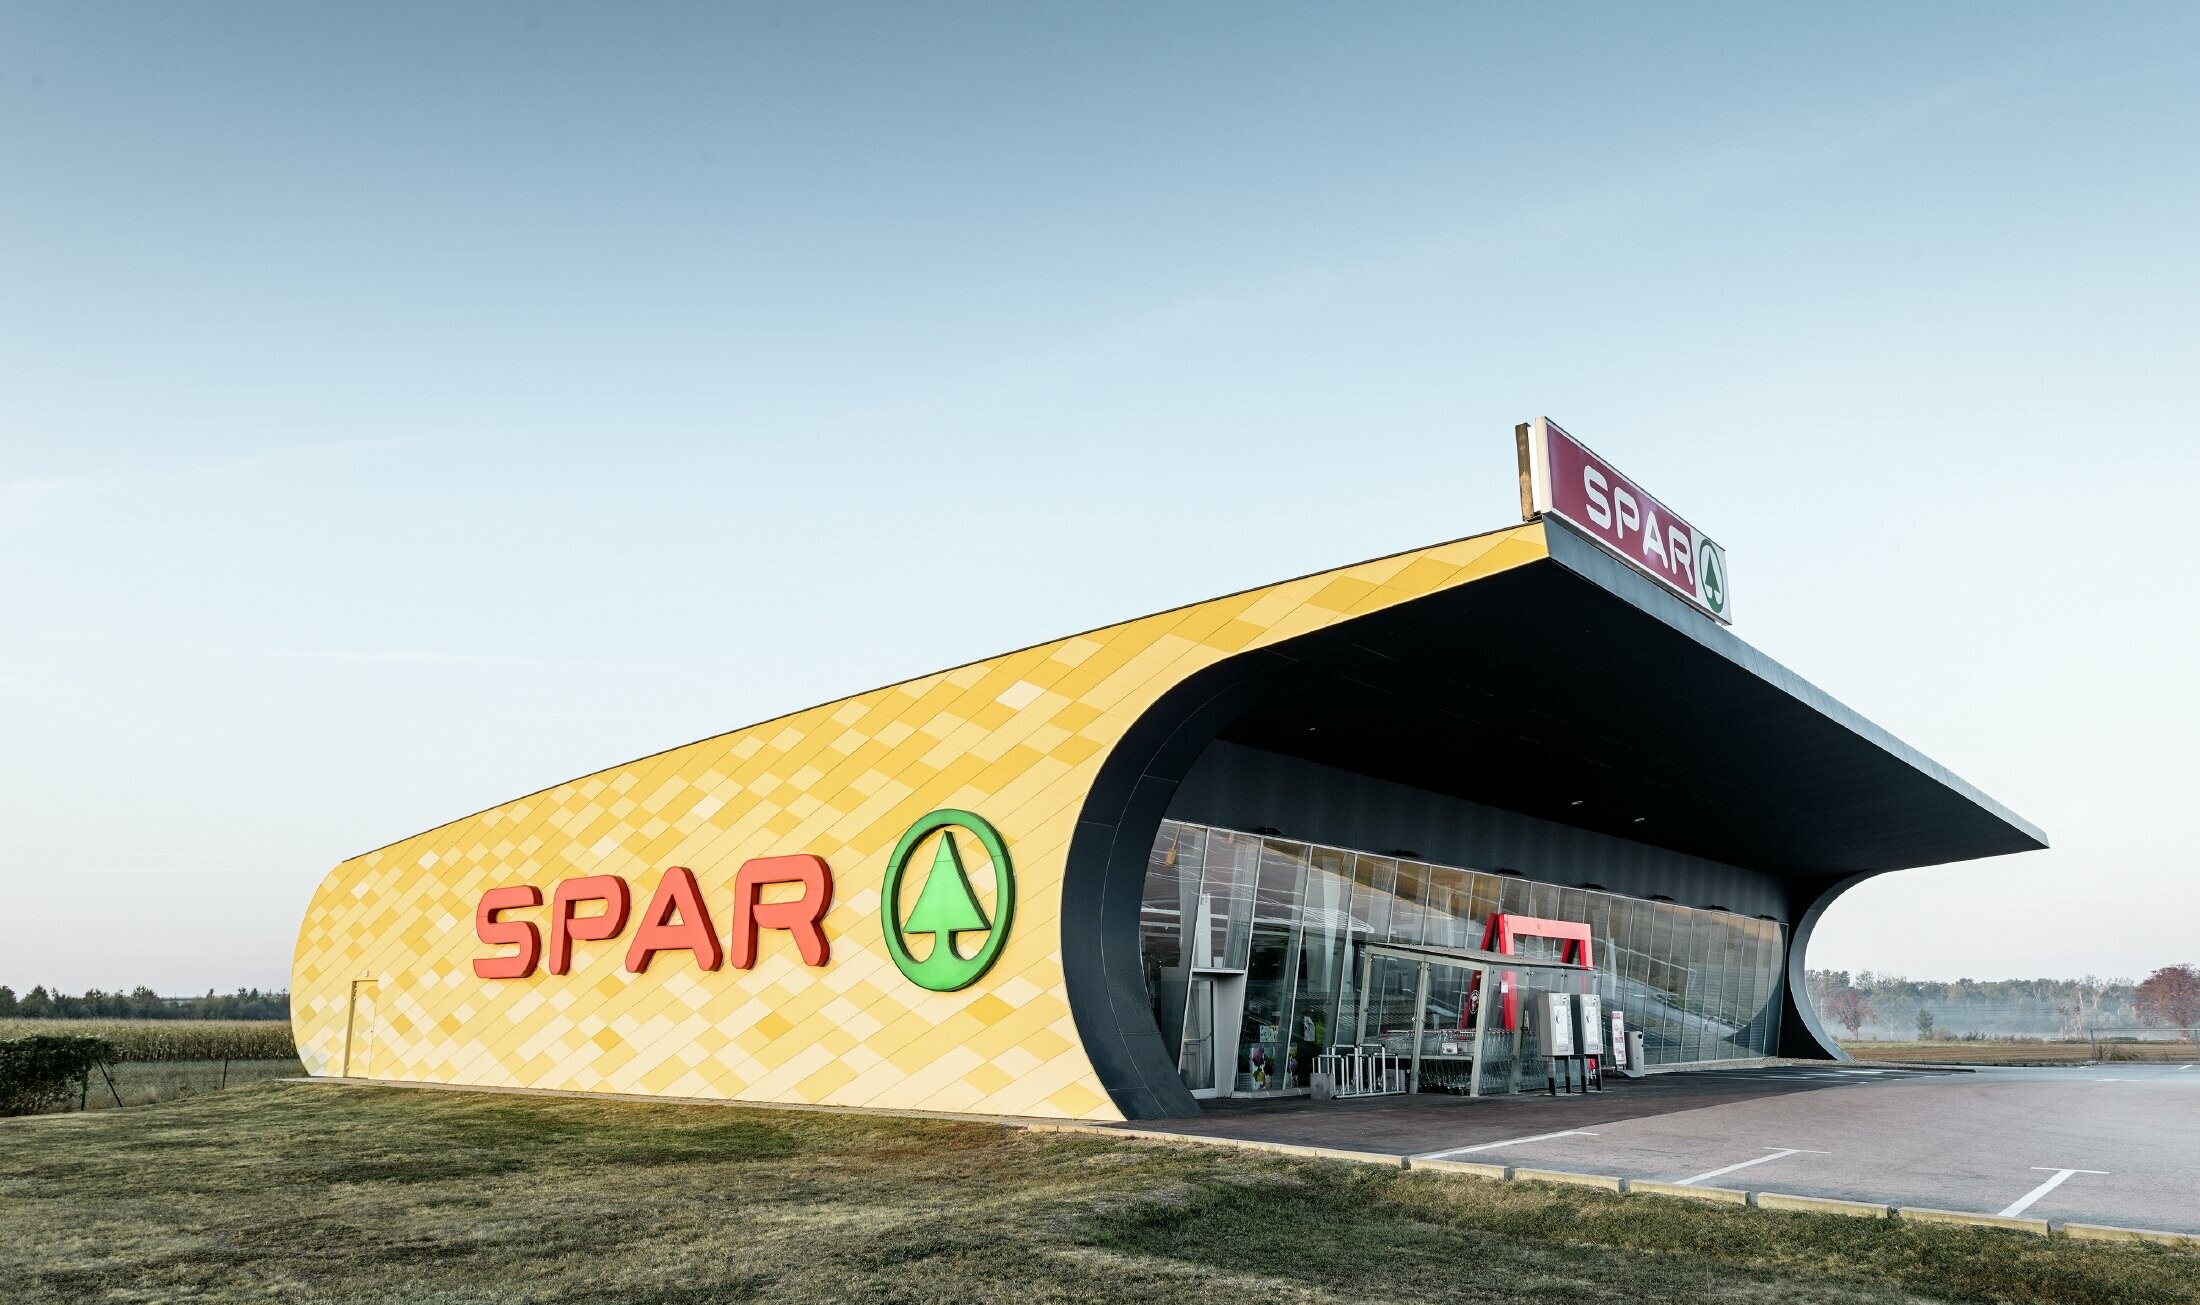 Spar branch with an aluminium façade in yellow and orange check and the Spar logo